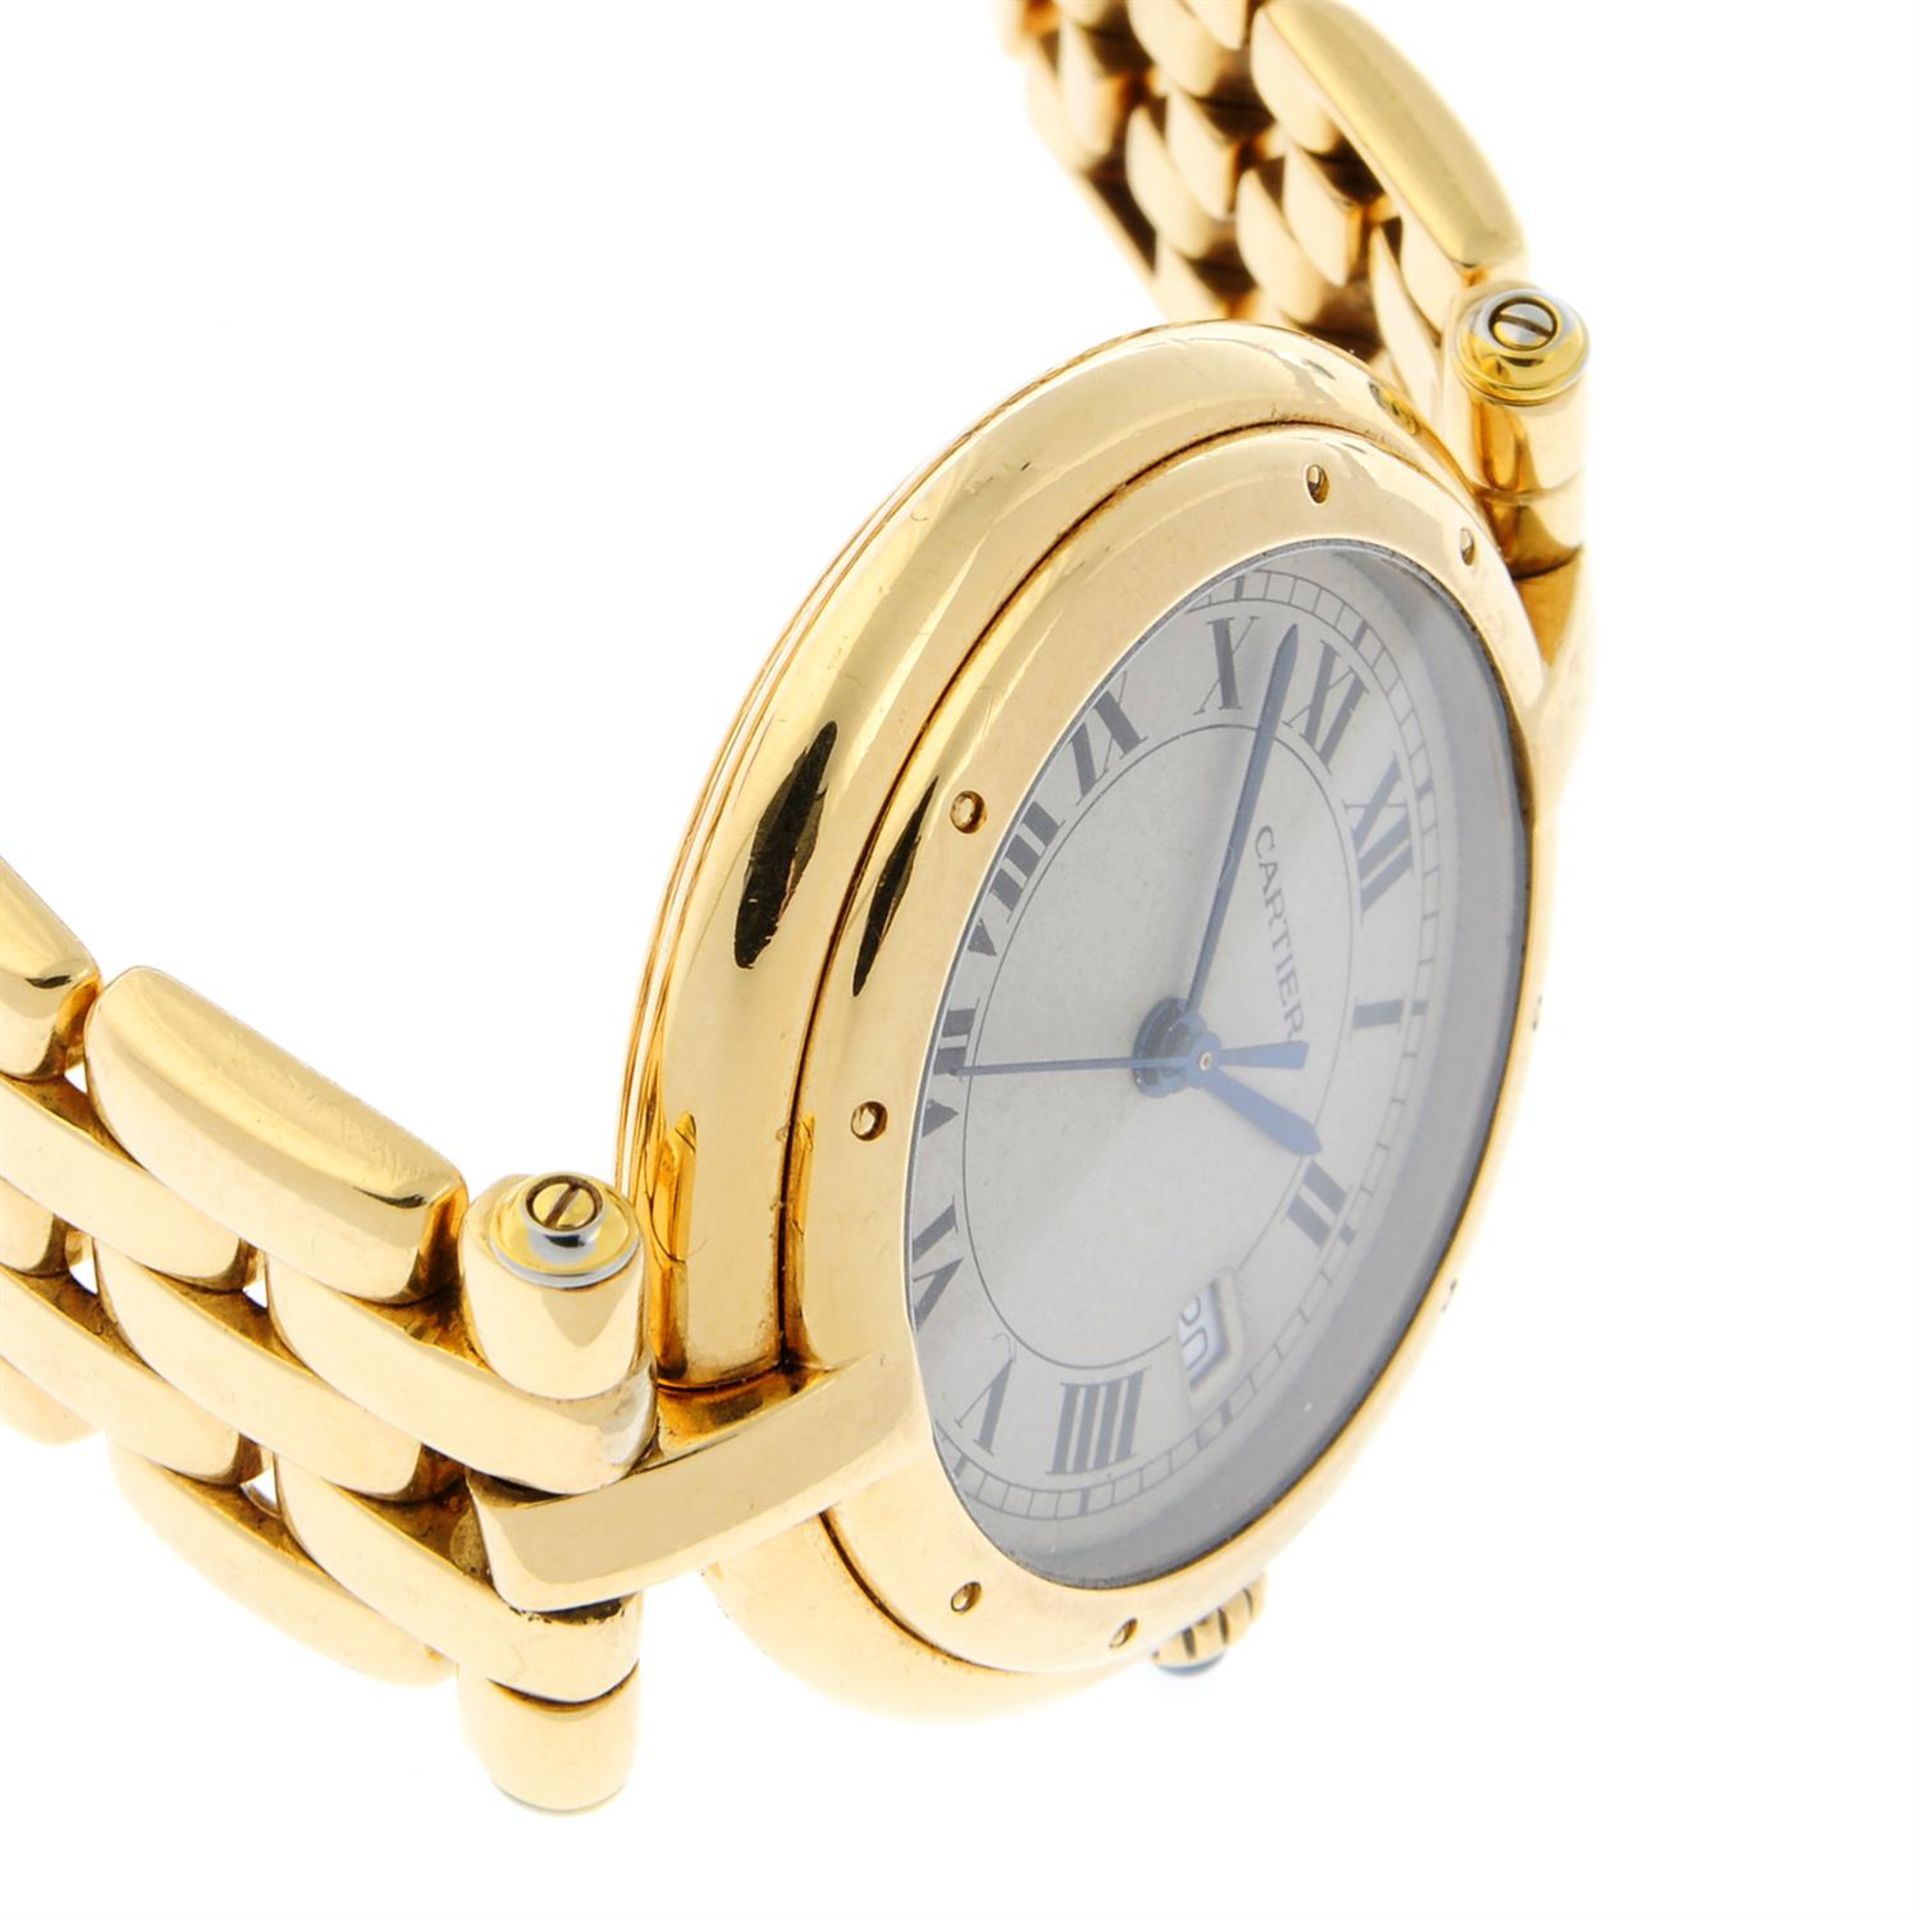 CARTIER - a 18ct gold Panthere Vendome bracelet watch, 24mm. - Image 4 of 6